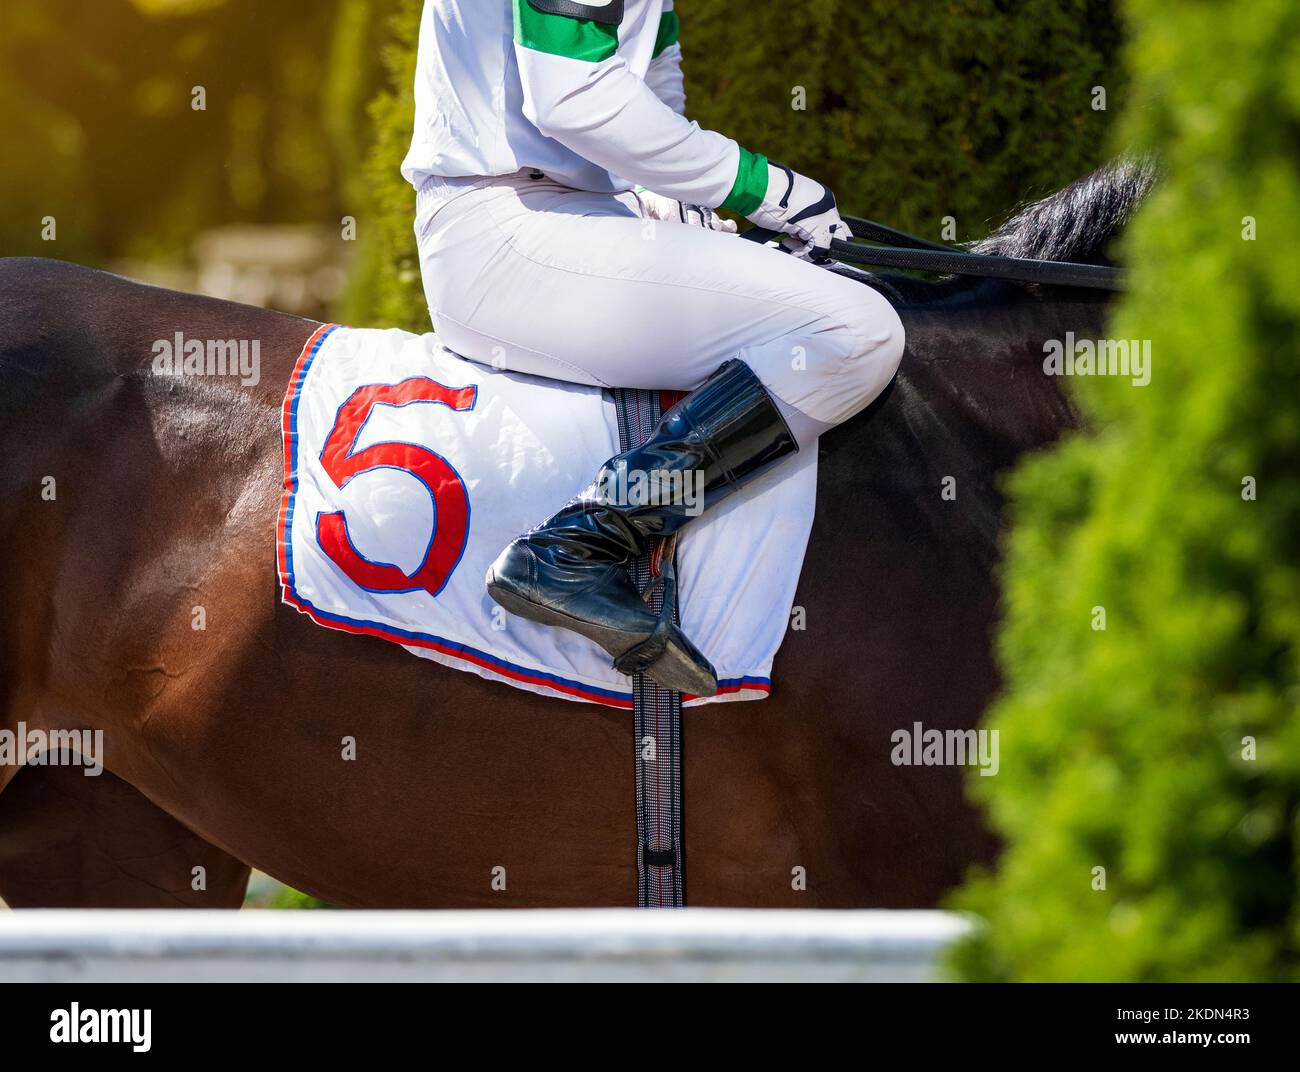 Hands and uniform of a jockey. Race horse in racing competition. Jockey sitting on racing horse. Sport. Champion. Hippodrome. Equestrian. Derby. Horse Stock Photo